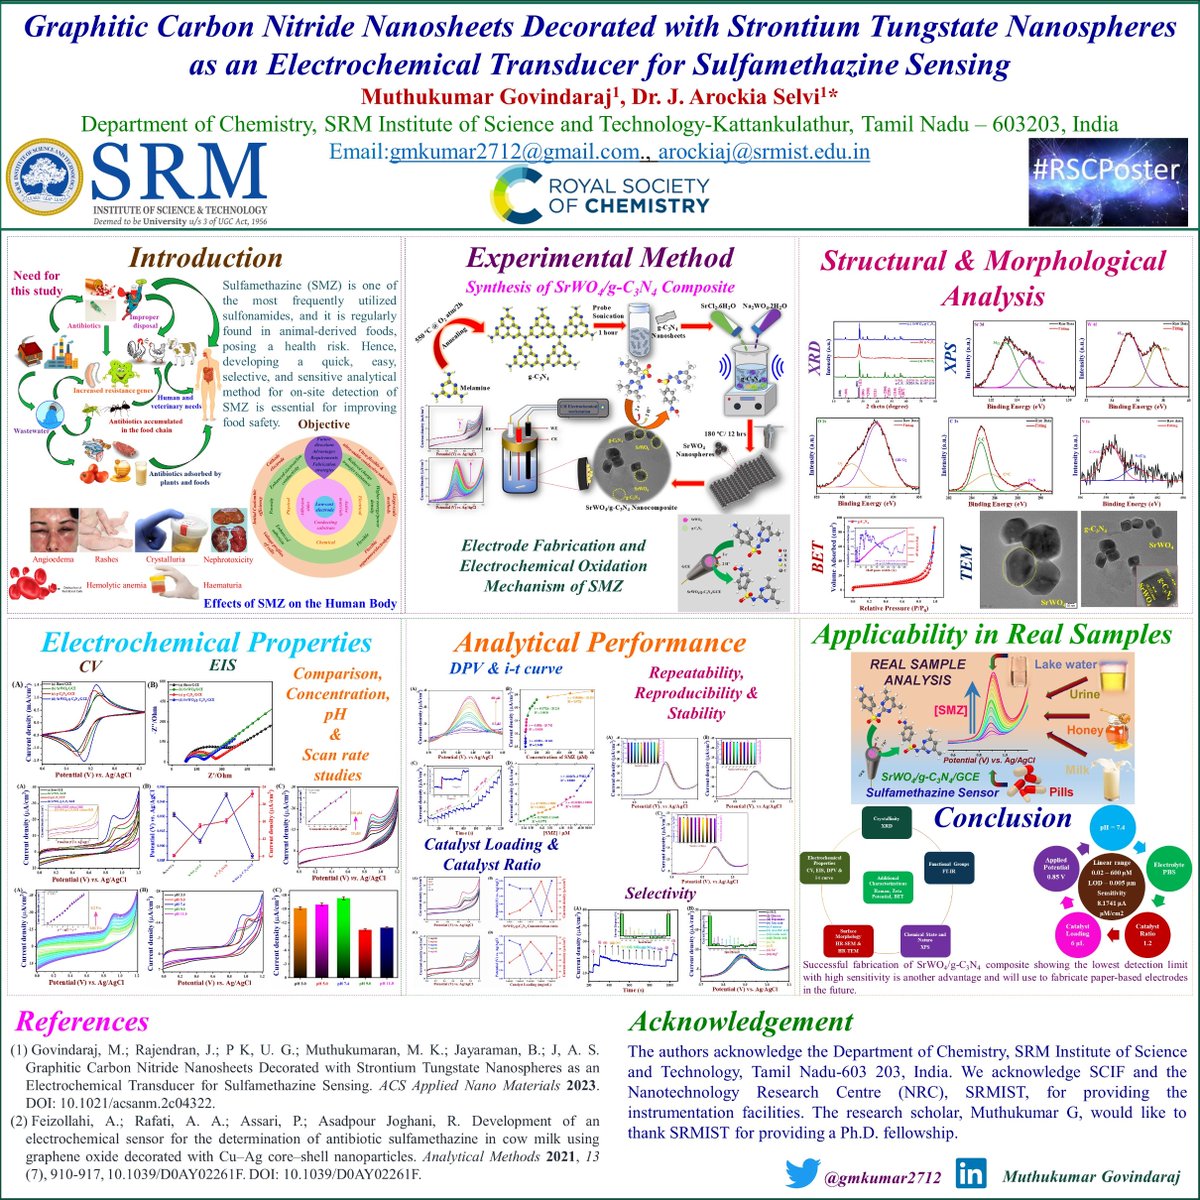 Happy to share our recent work on Graphitic Carbon Nitride Nanosheets Decorated with Strontium Tungstate Nanospheres as an Electrochemical Transducer for Sulfamethazine Sensing. Zoomable poster. Happy to answer any questions! #RSCPoster #RSCCat #RSCInorg #RSCMat #RSCEnv #RSCNano